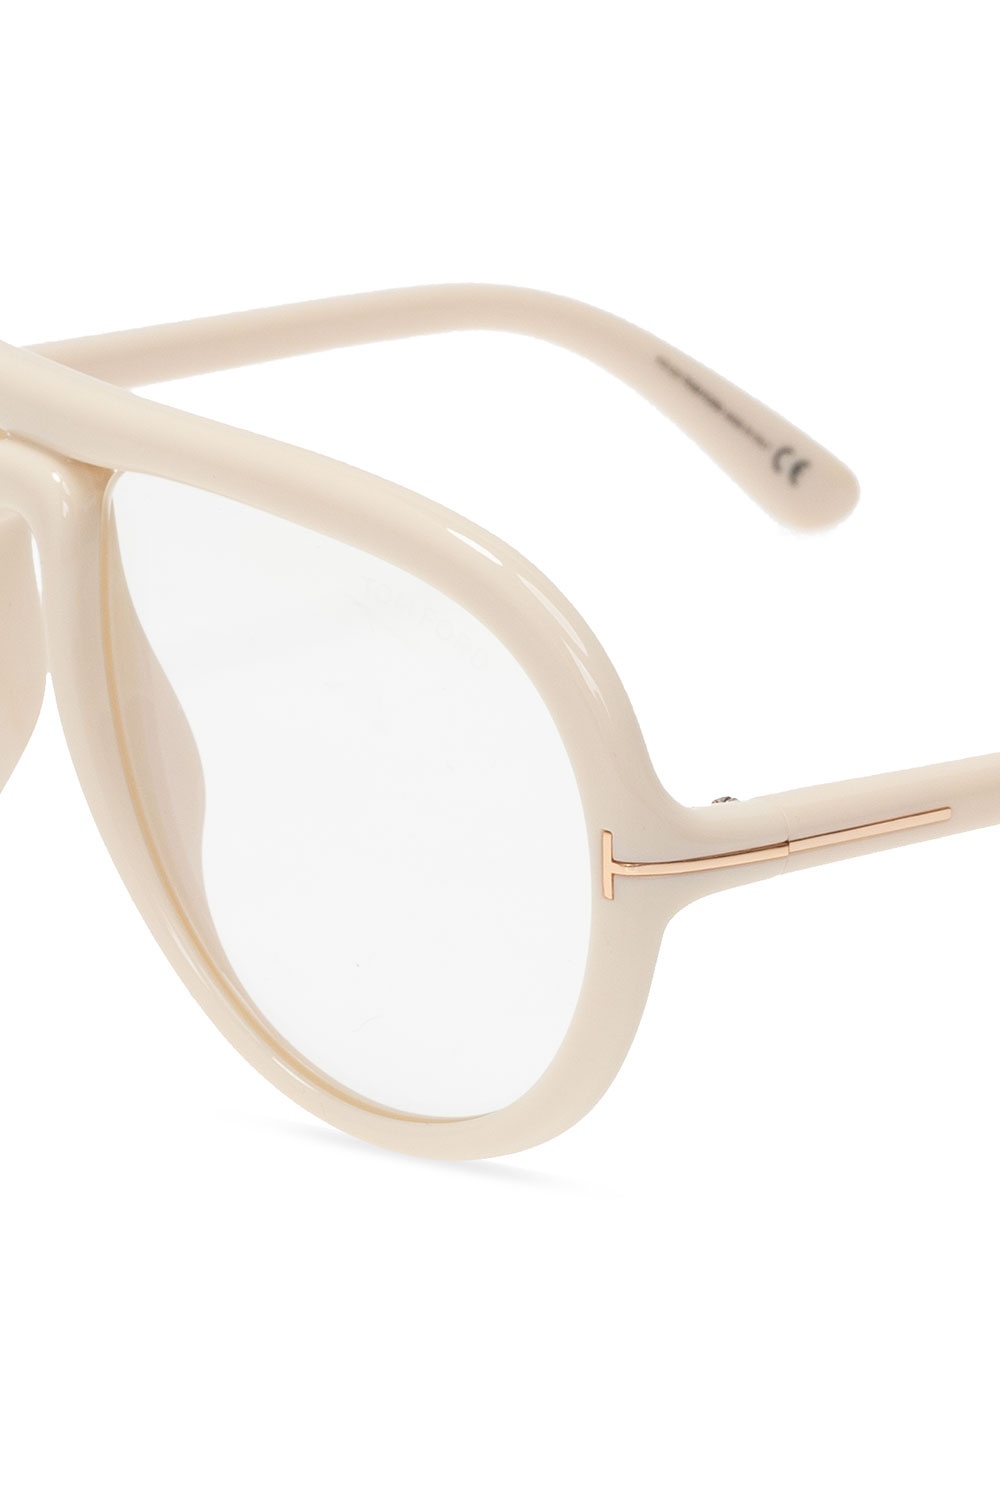 Tom Ford 'Cybil' optical glasses with logo | Women's Accessories | Vitkac